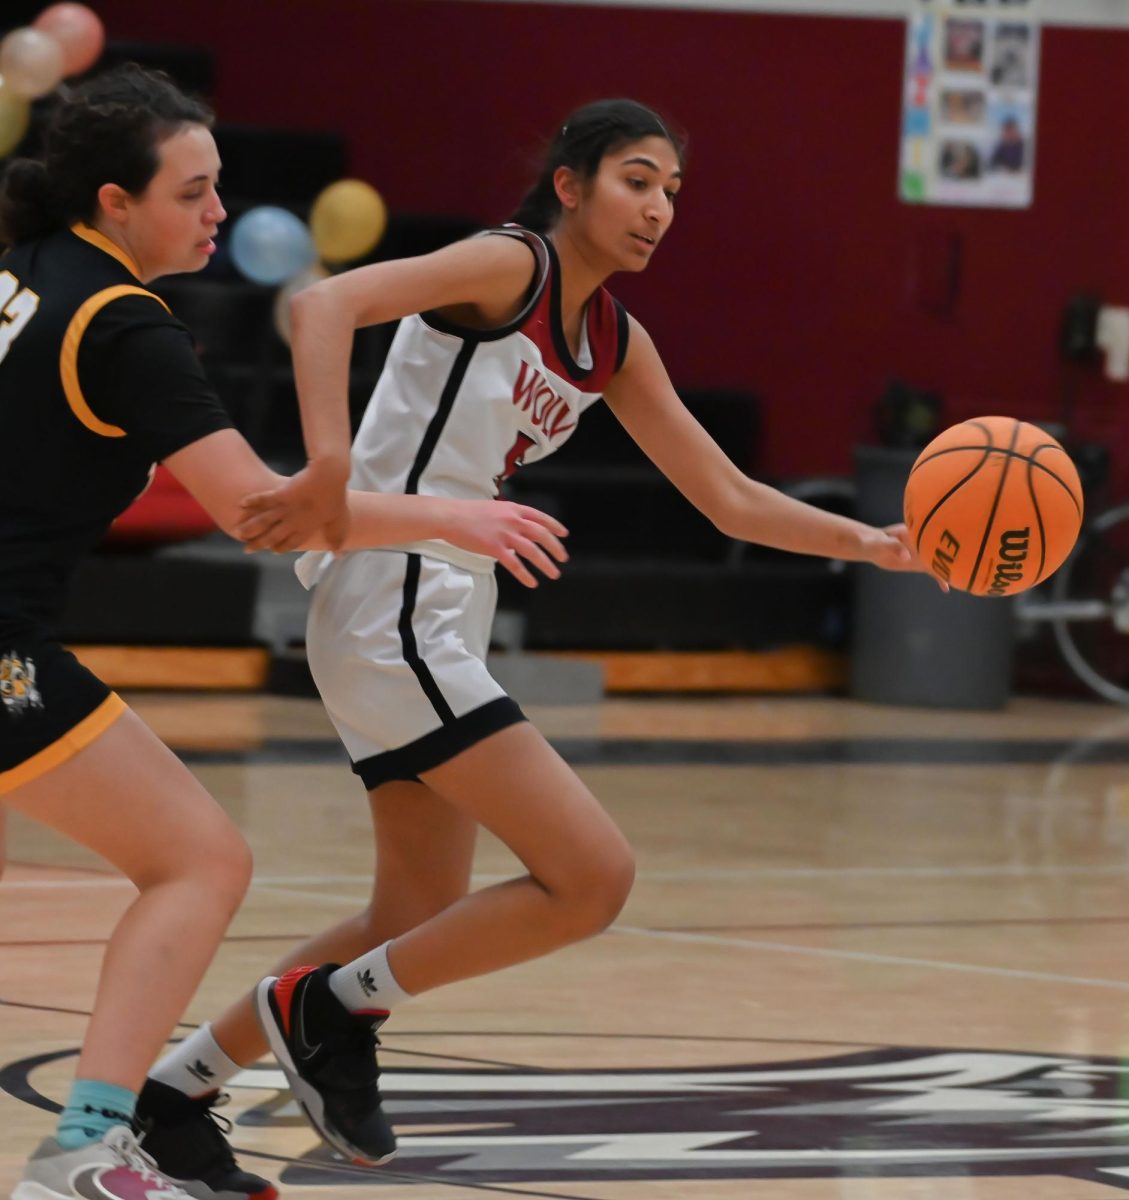 Junior%2C+Karen+Grewal+successfully+gets+passed+her+defender+as+she+runs+to+score+a+layup.+